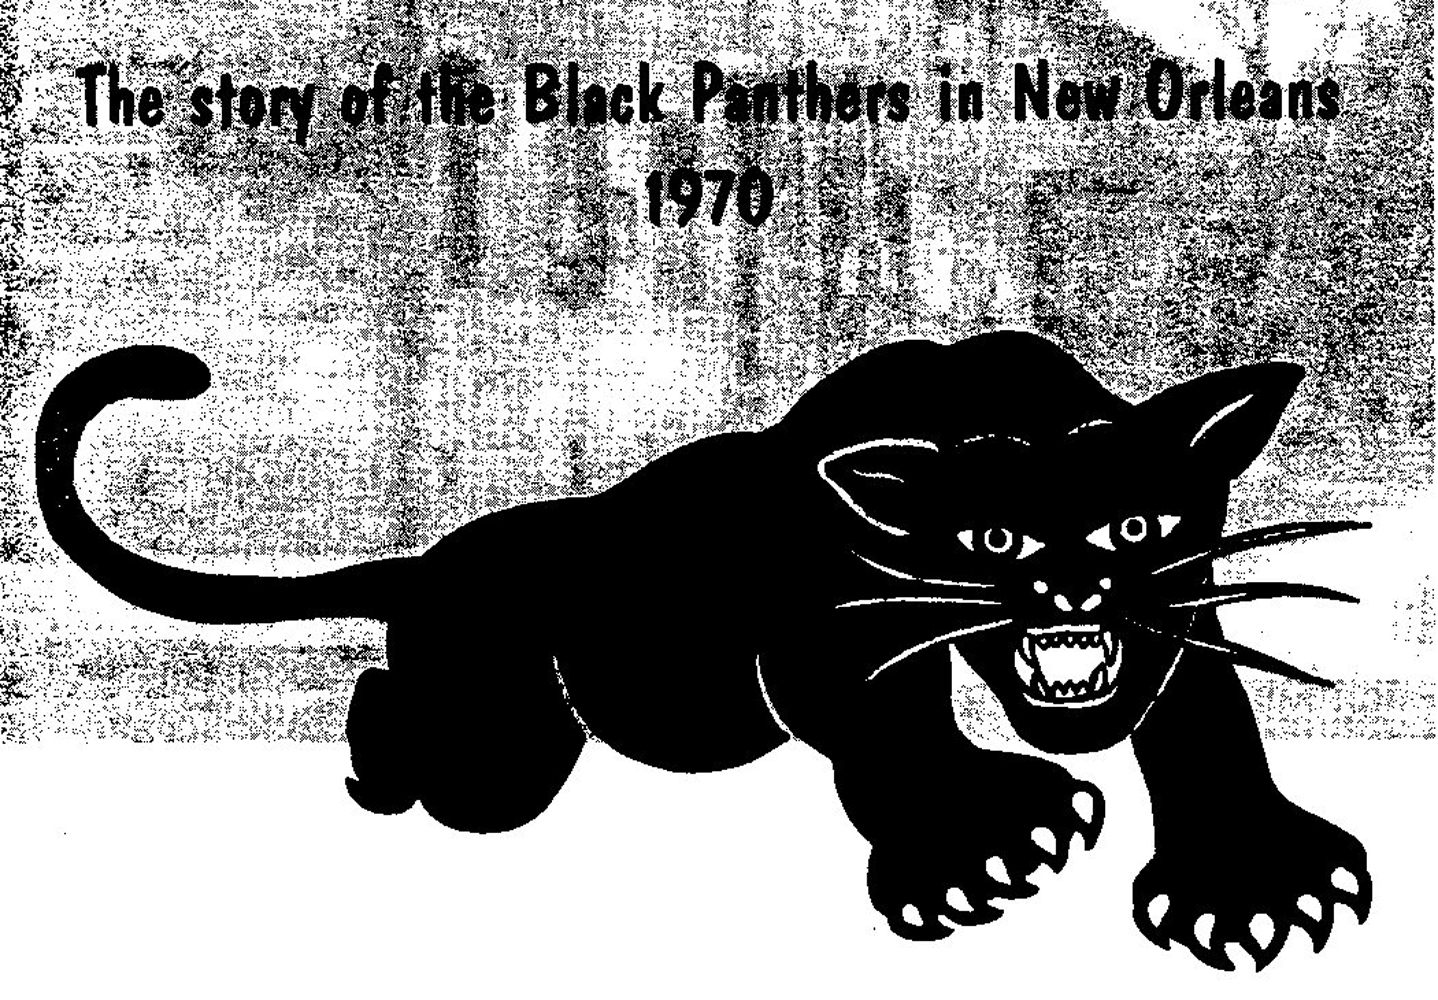 Black Panther Party Local Chapters